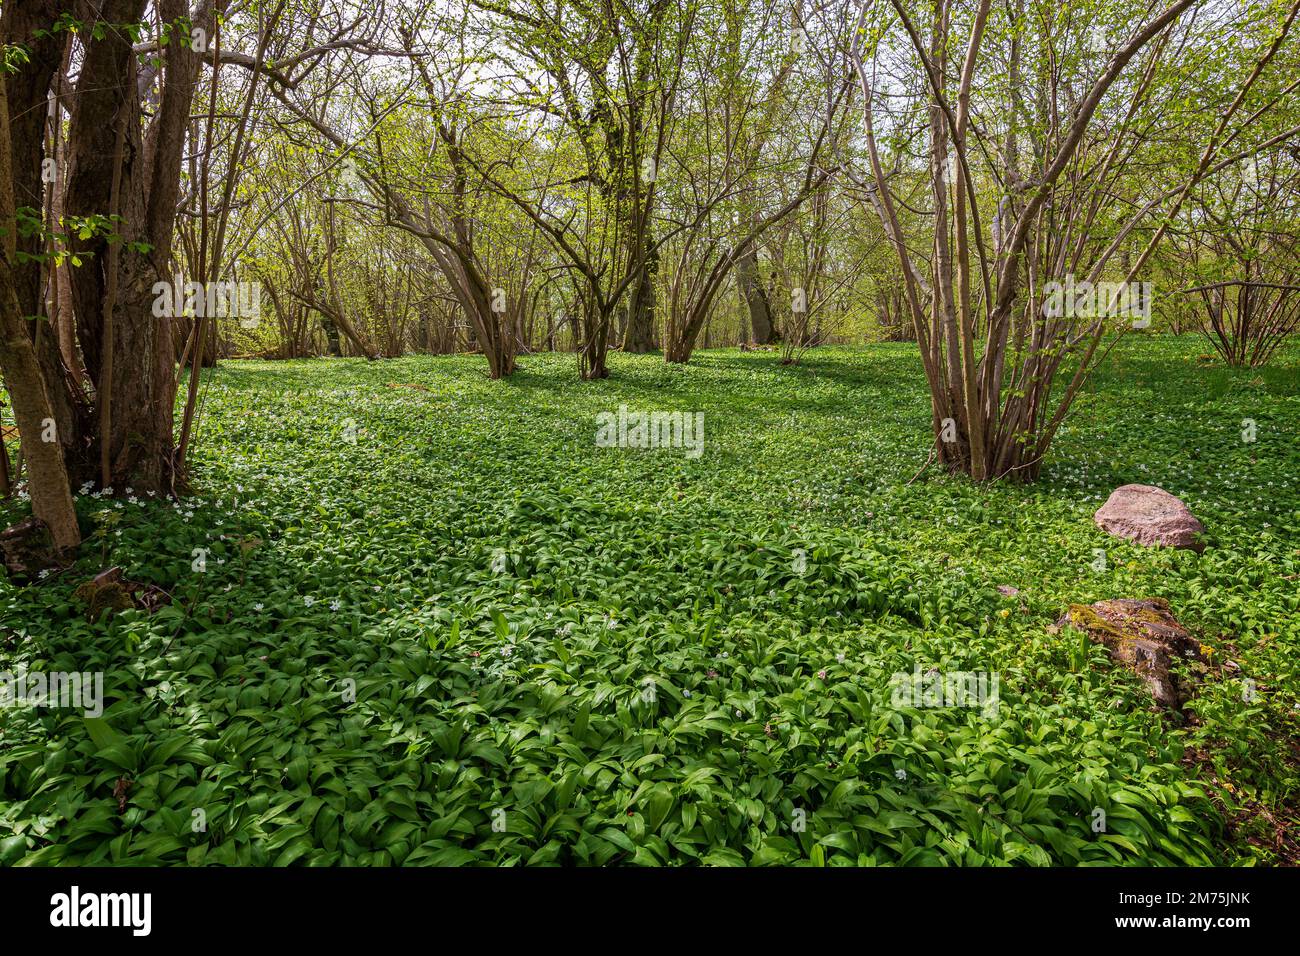 Beautiful view of white anemone flowers blossom and other plants in a lush grove at the Ramsholmen nature reserve in Åland Islands, Finland, in spring Stock Photo